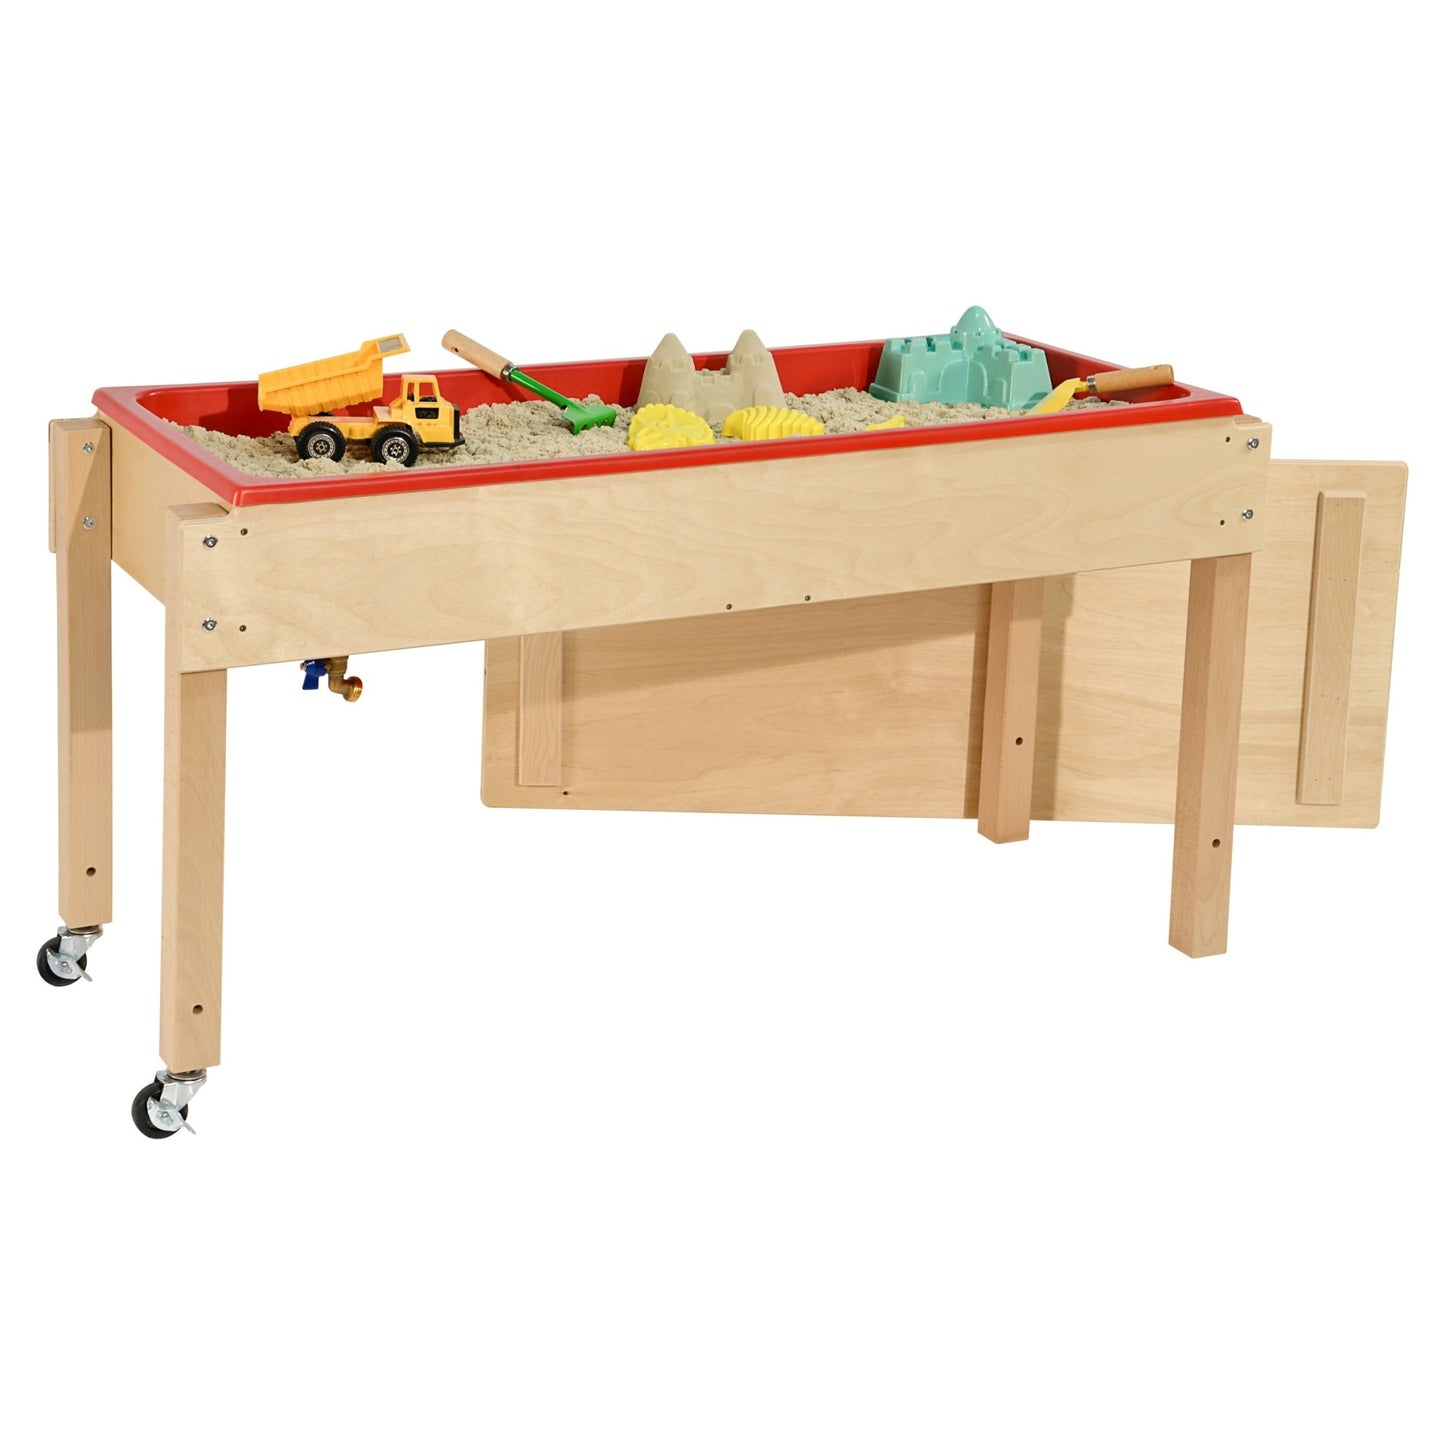 Wood Designs Contender Sand and Water Table - RTA - (C11800) - SchoolOutlet